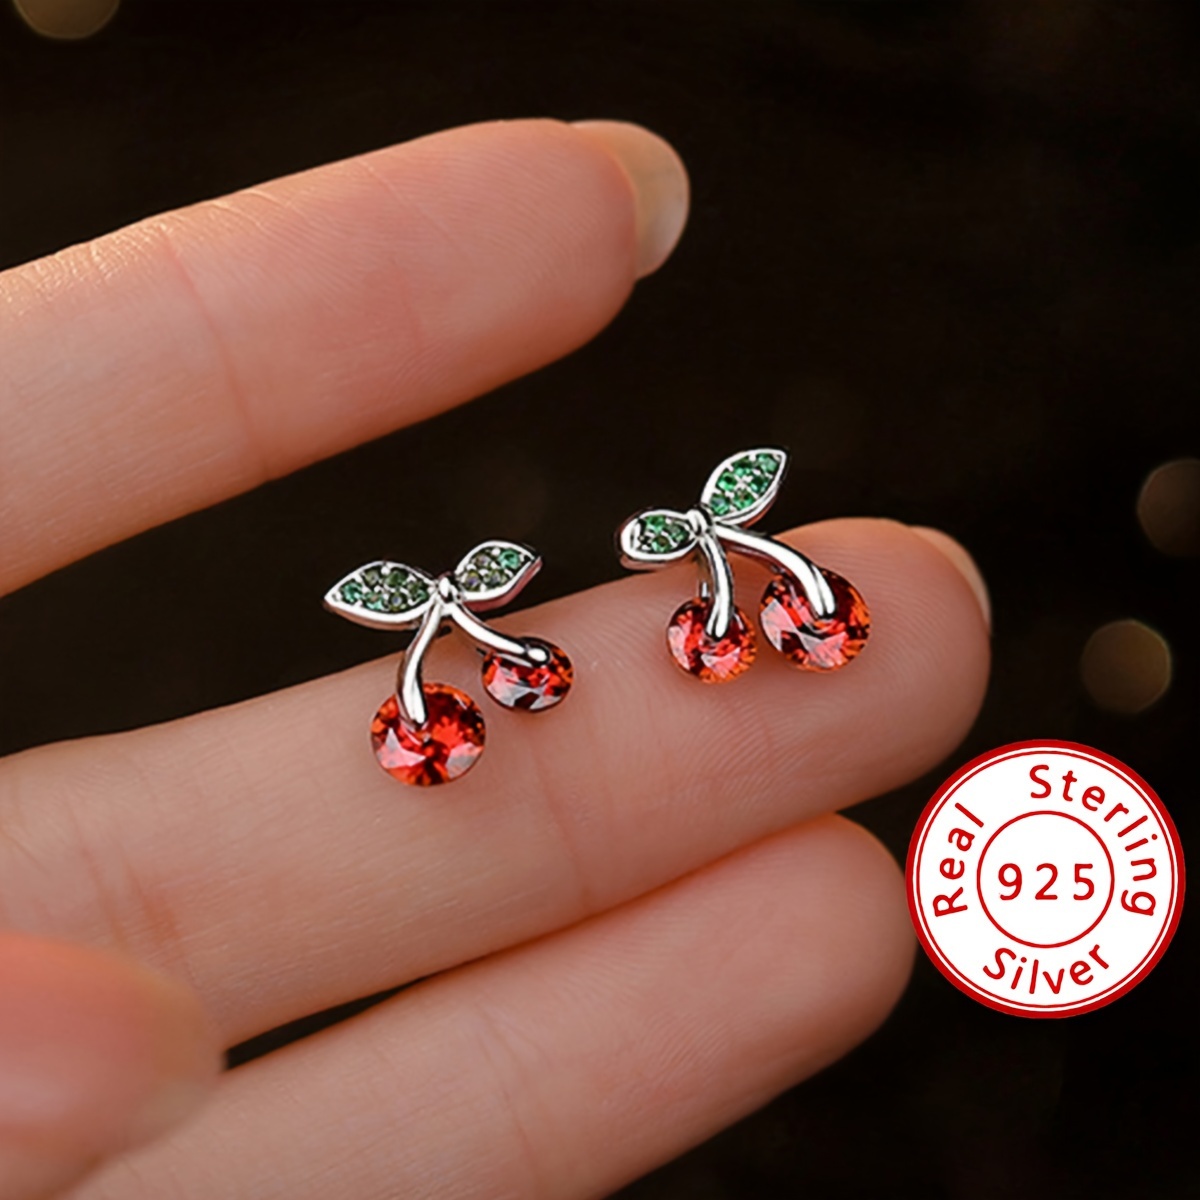 

S925 Sterling Silver Cherry Shaped Stud Earrings Artificial Zircon Decor Shiny Stud Earrings For Daily And Dating Wearing, Party Birthday Festival Jewelry Gifts 1.8g/0.06oz